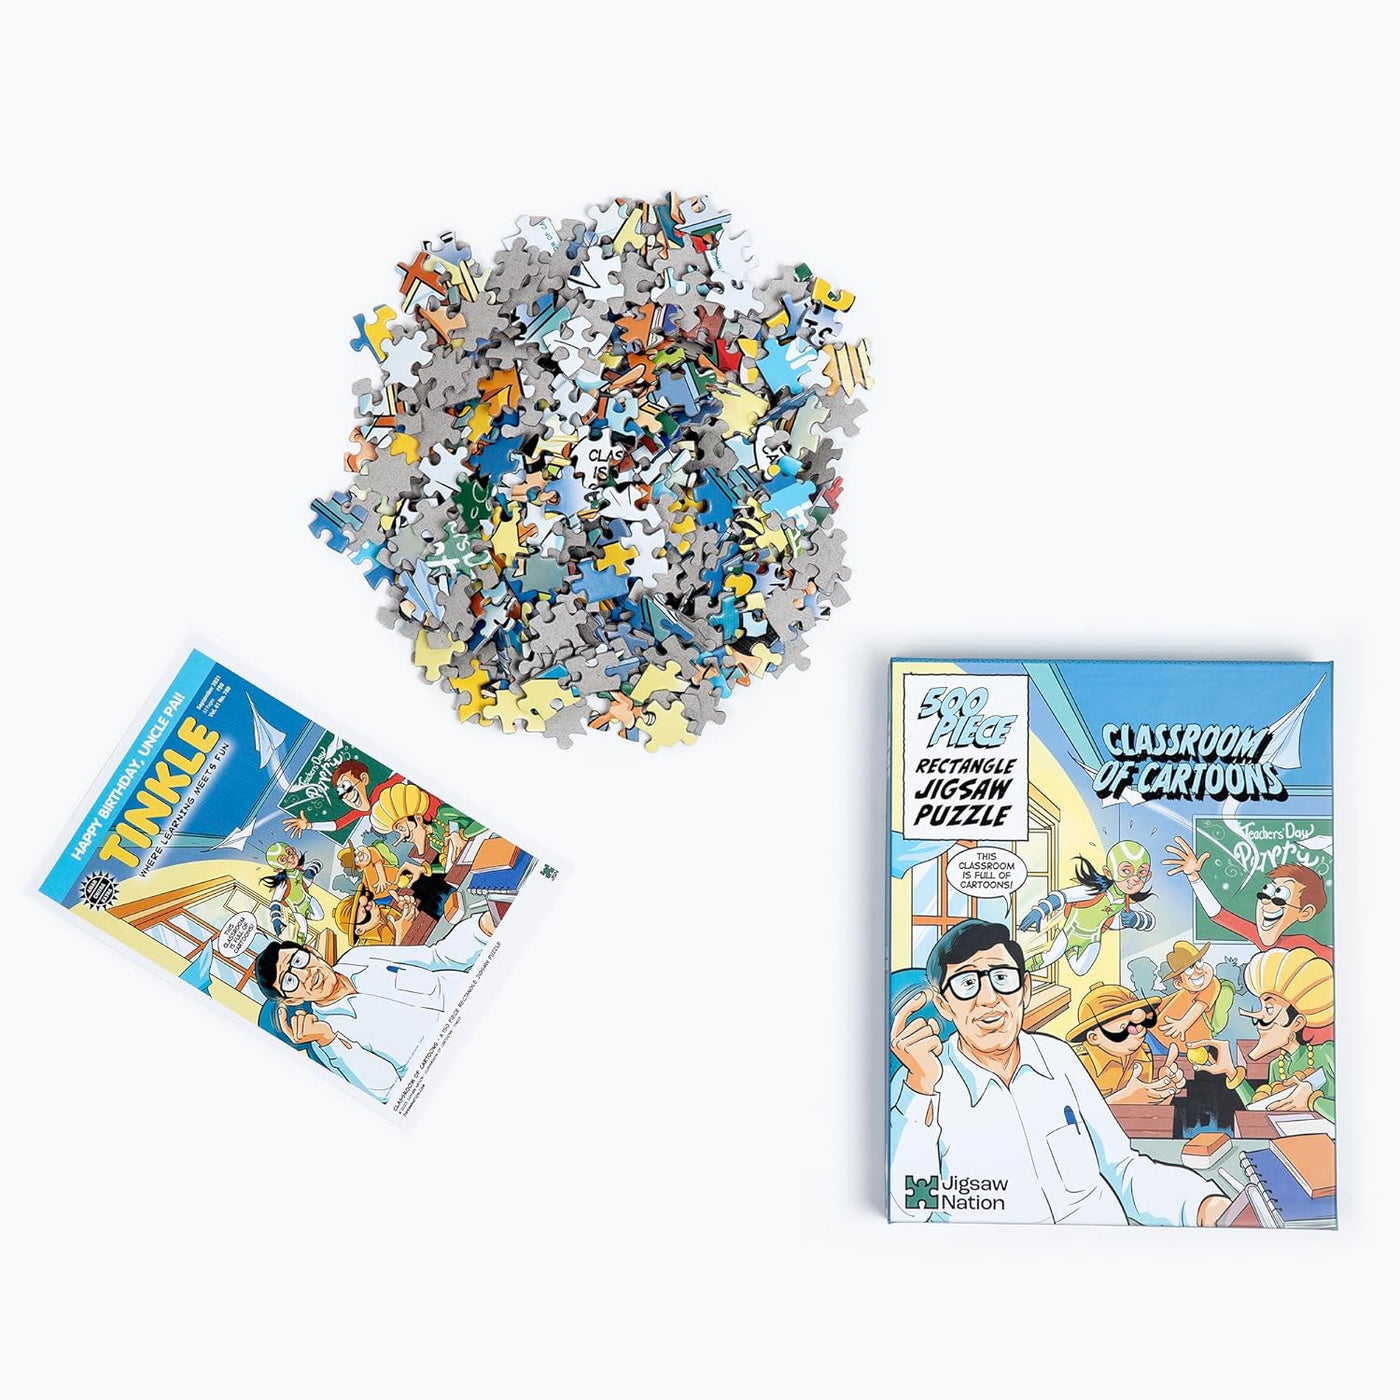 Jigsaw Nation: Classroom of Cartoons – Tinkle – 500 Piece Puzzle